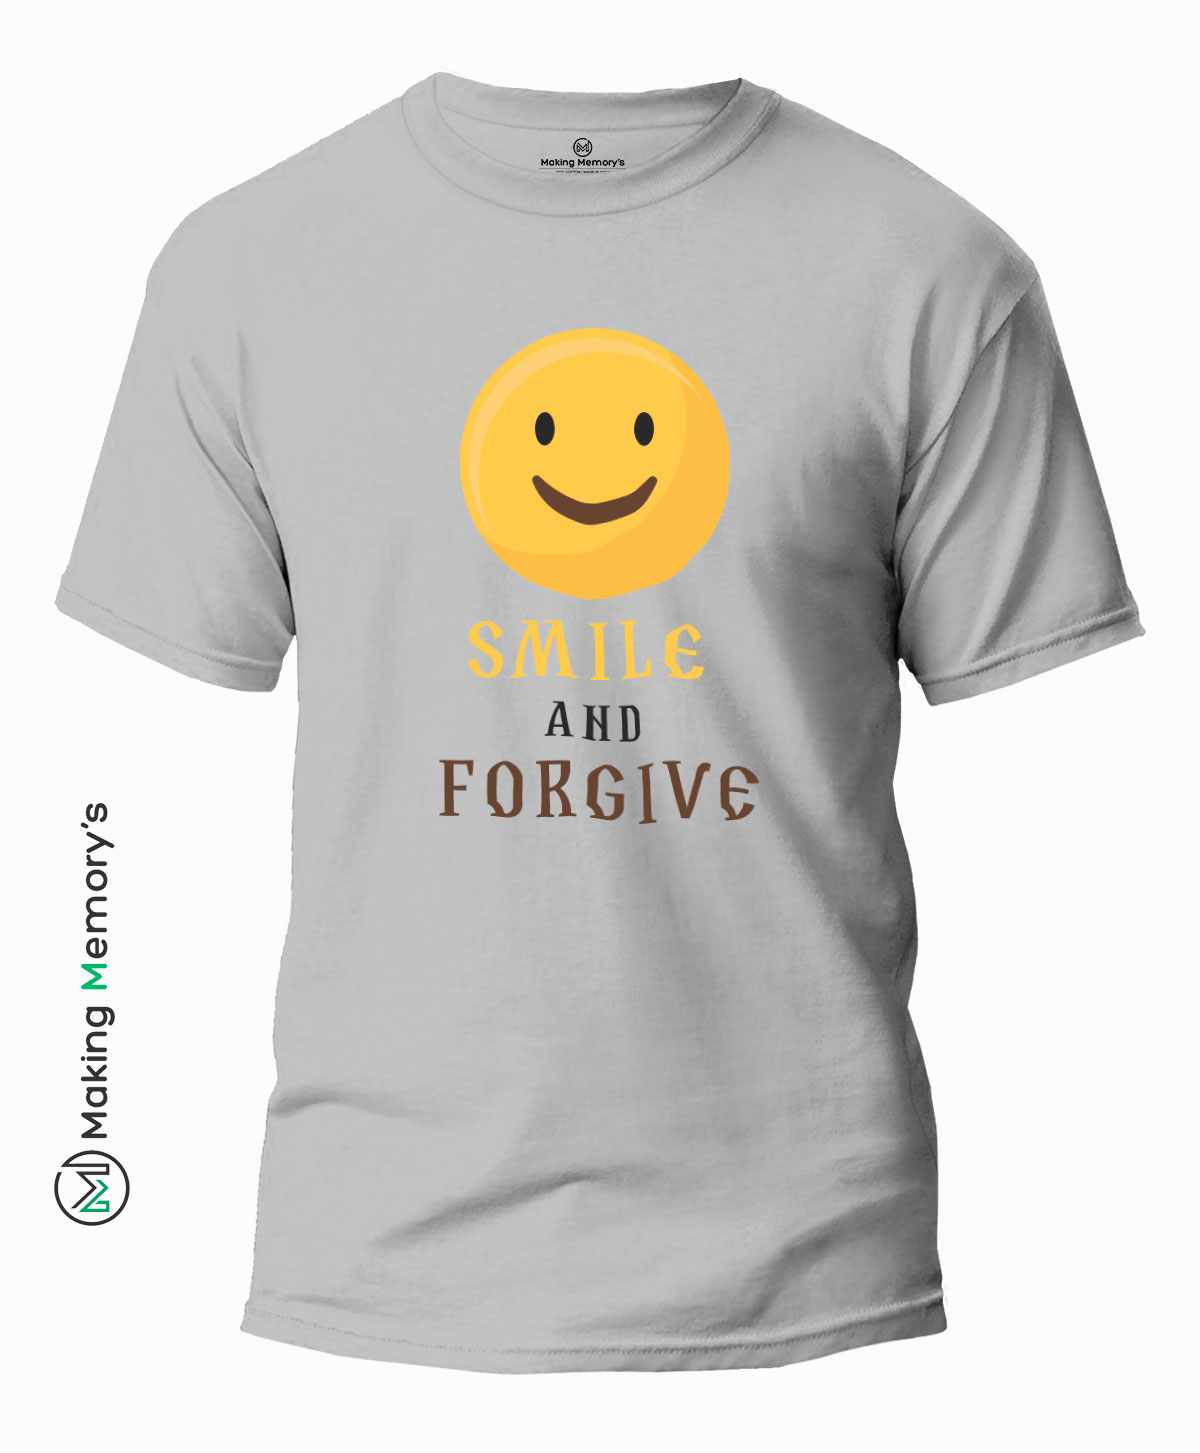 Smile-and-Forgive-Gray-T-Shirt